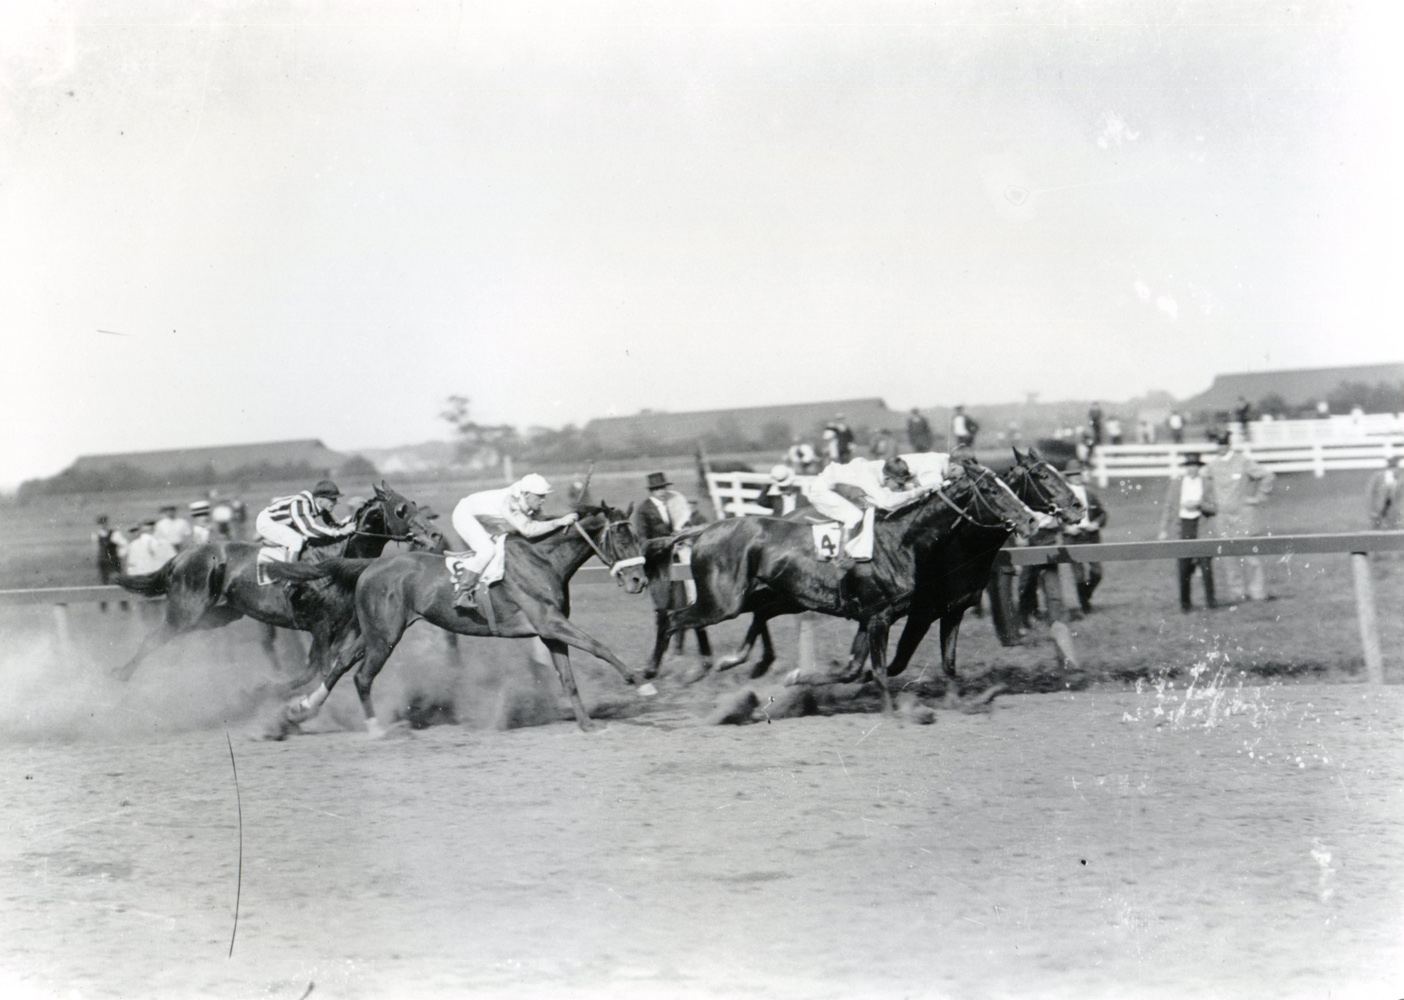 Willie Knapp and Borrow winning the 1917 Brooklyn Handicap at Aqueduct (Keeneland Library Cook Collection/Museum Collection)